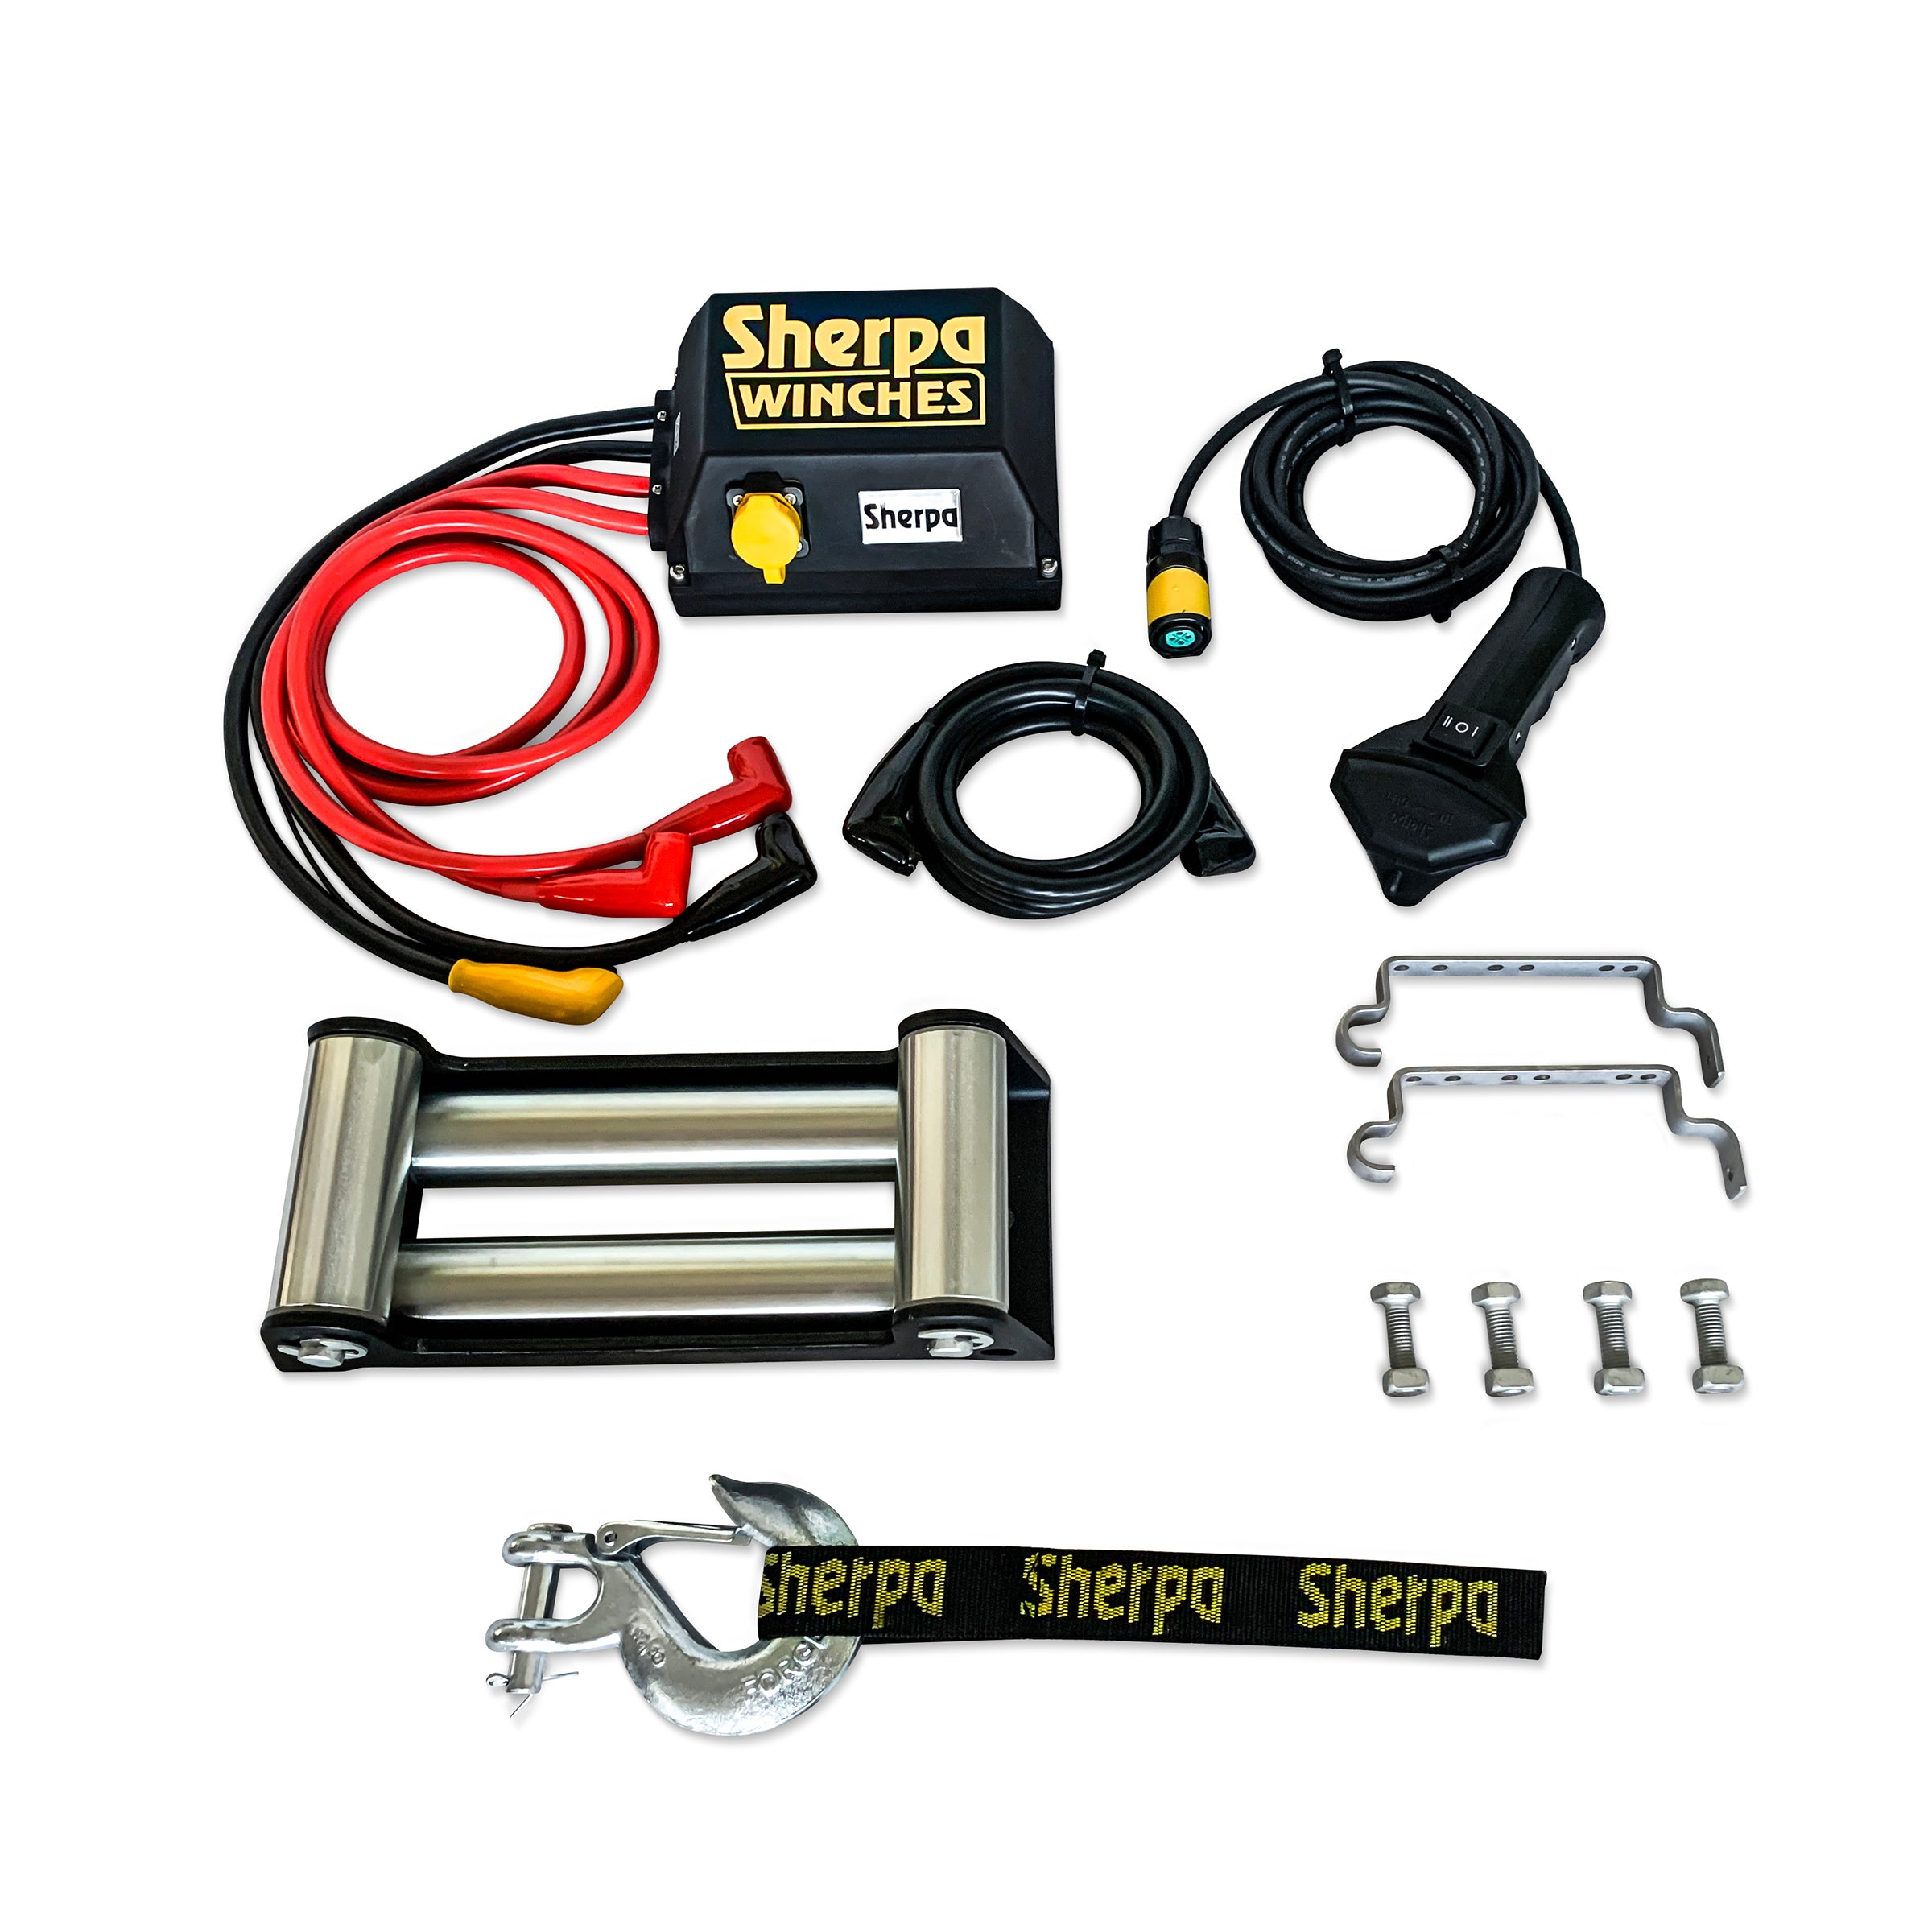 Sherpa cable winch accessories